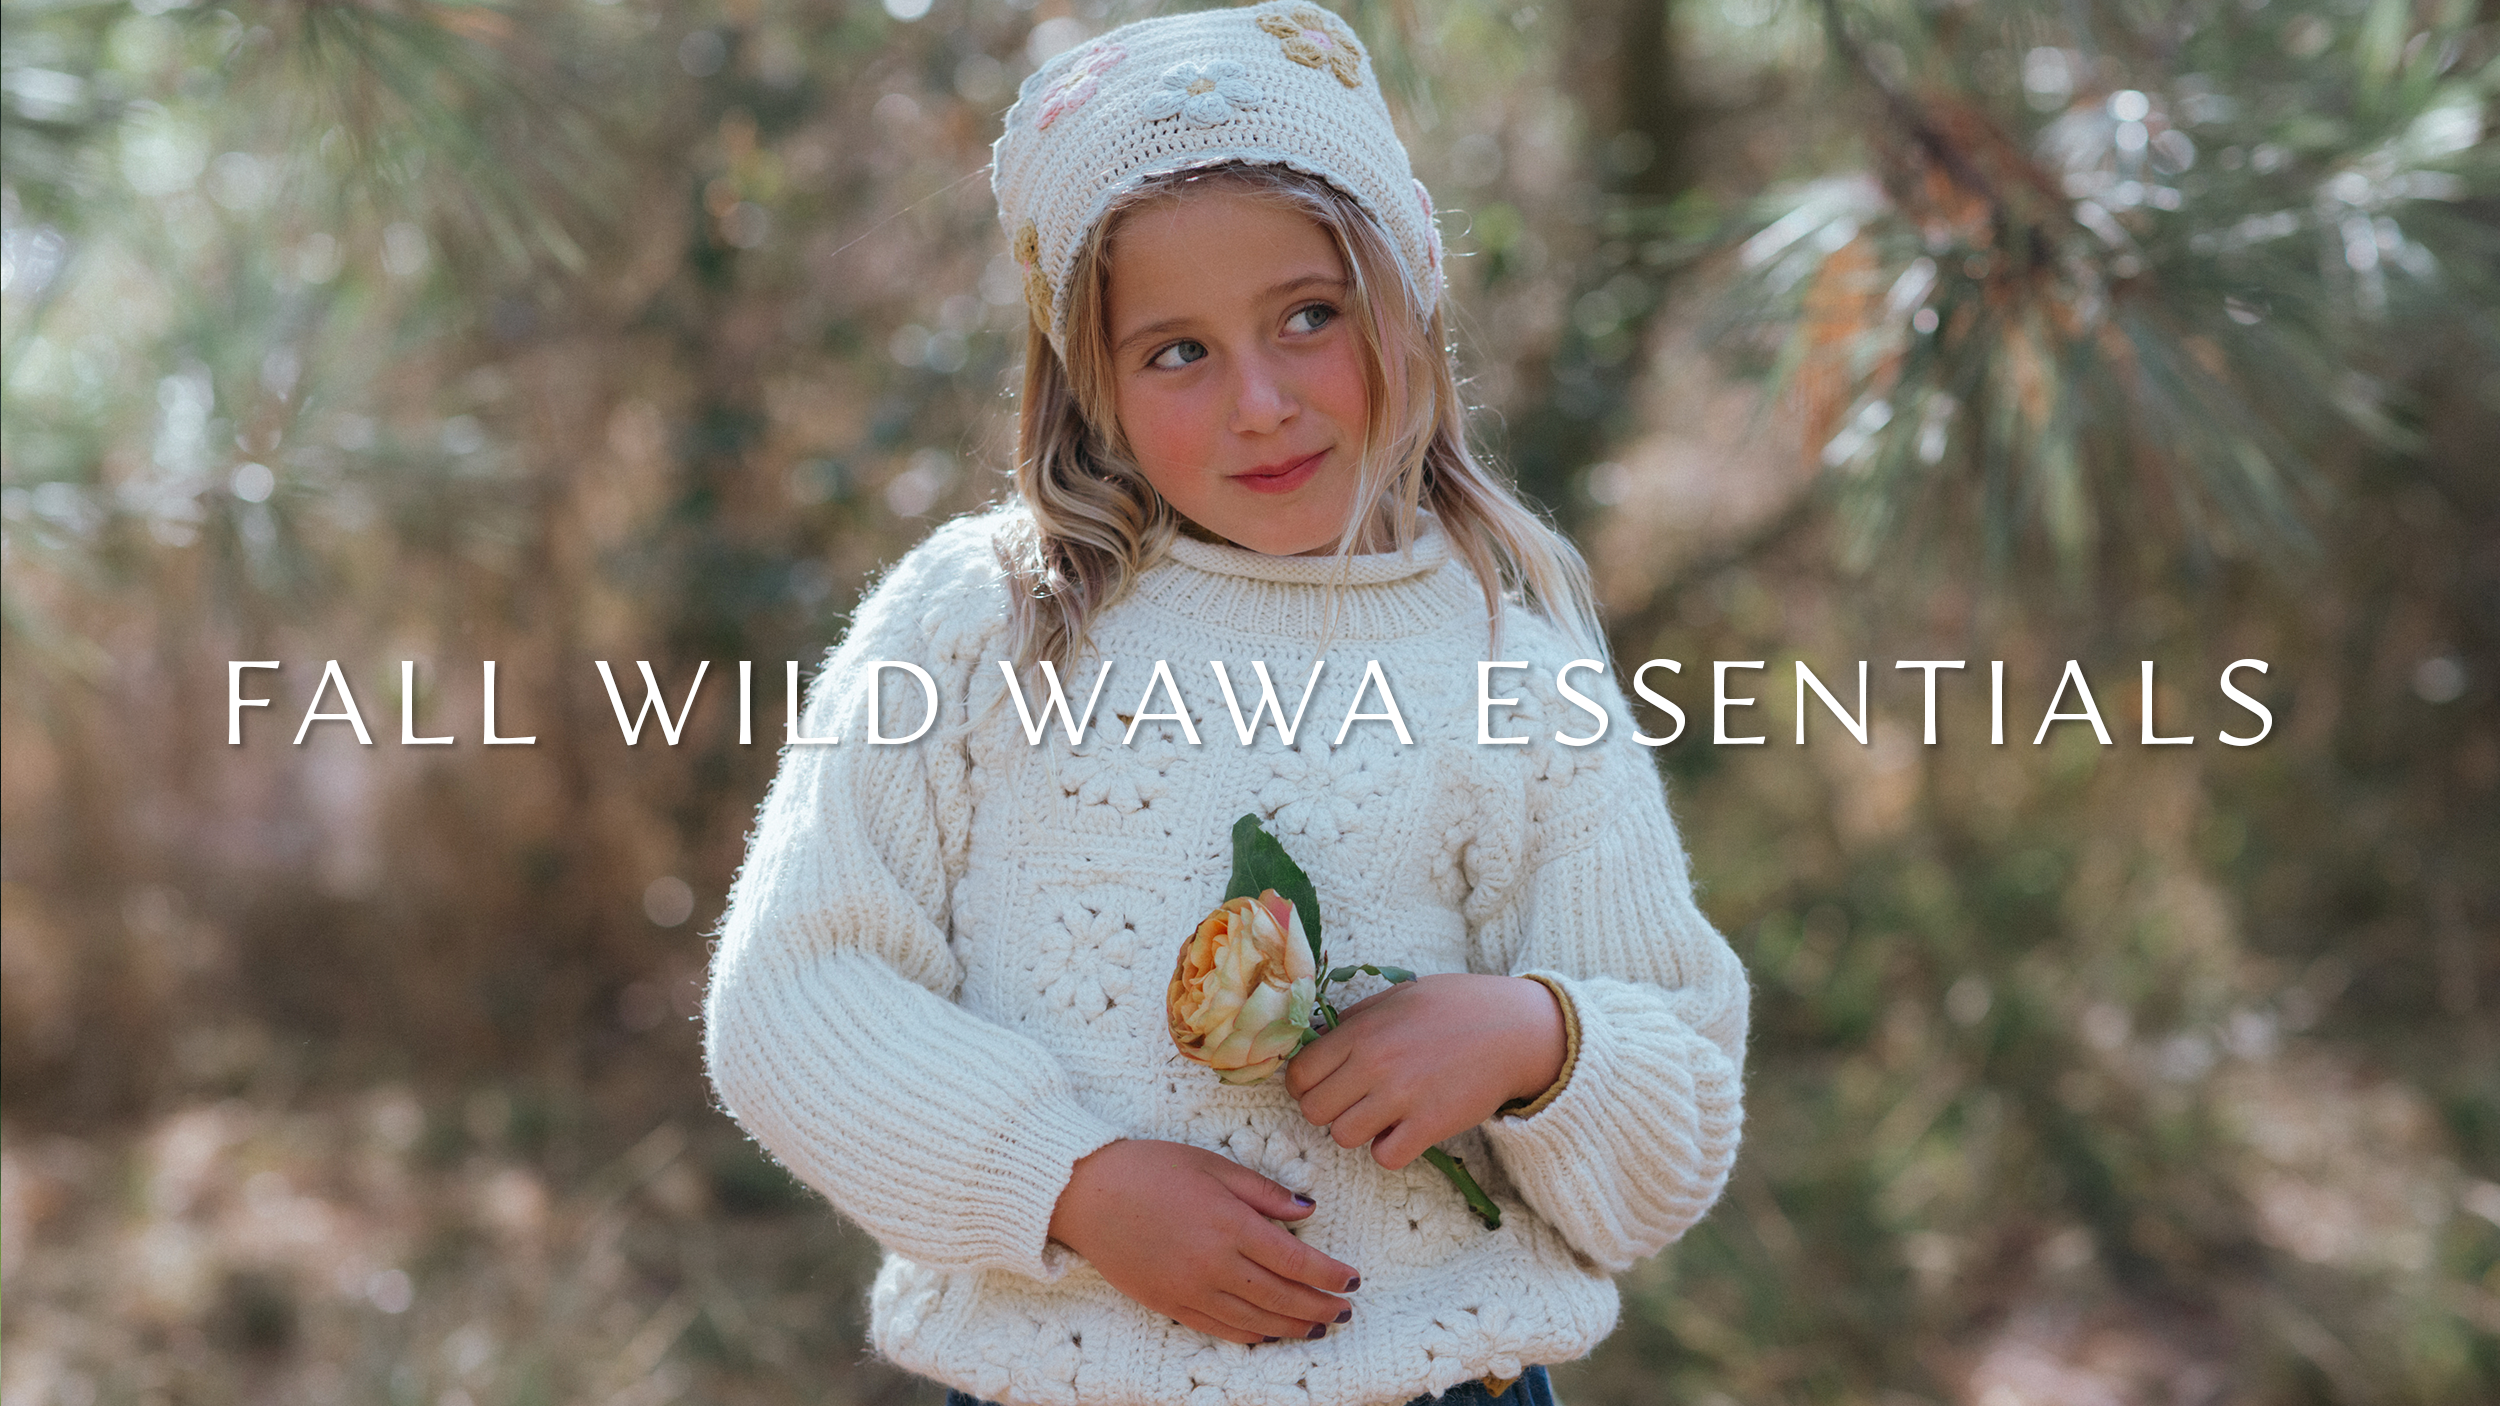 Fall Wild Wawa Essentials:  Must-Have Wardrobe Staples for the Season